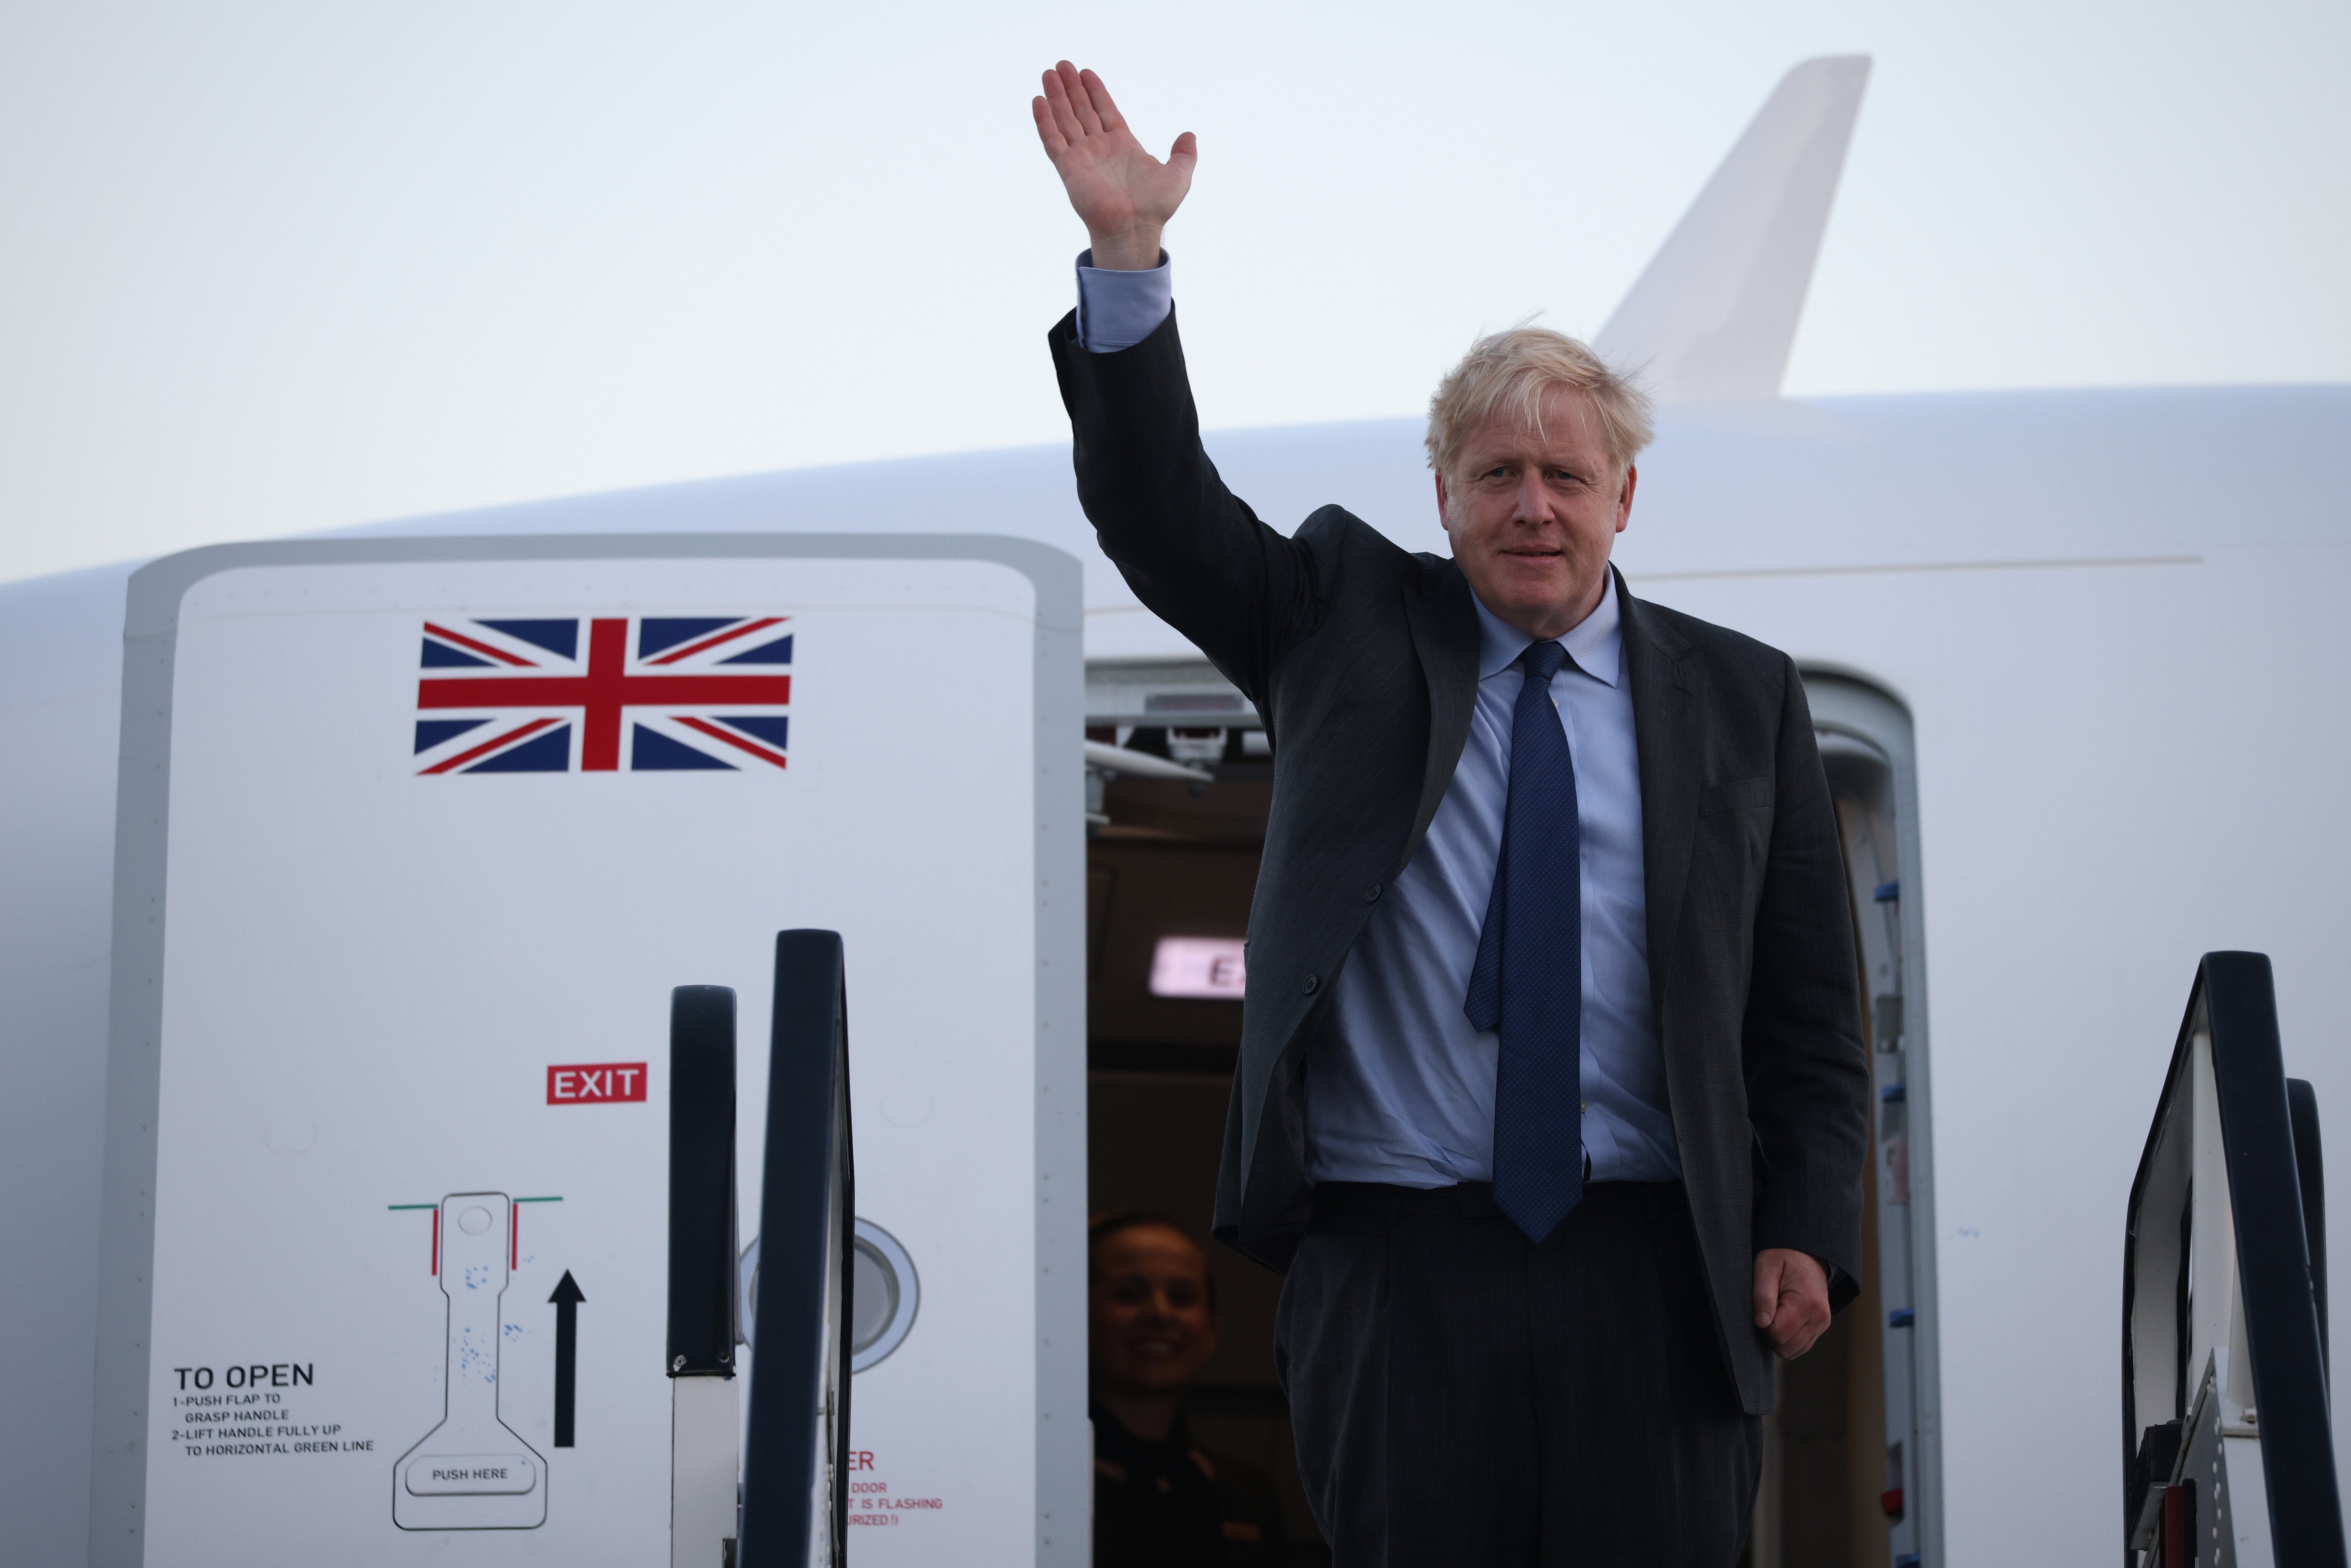 Boris Johnson has come under fire once again for use of a private plane for a short journey